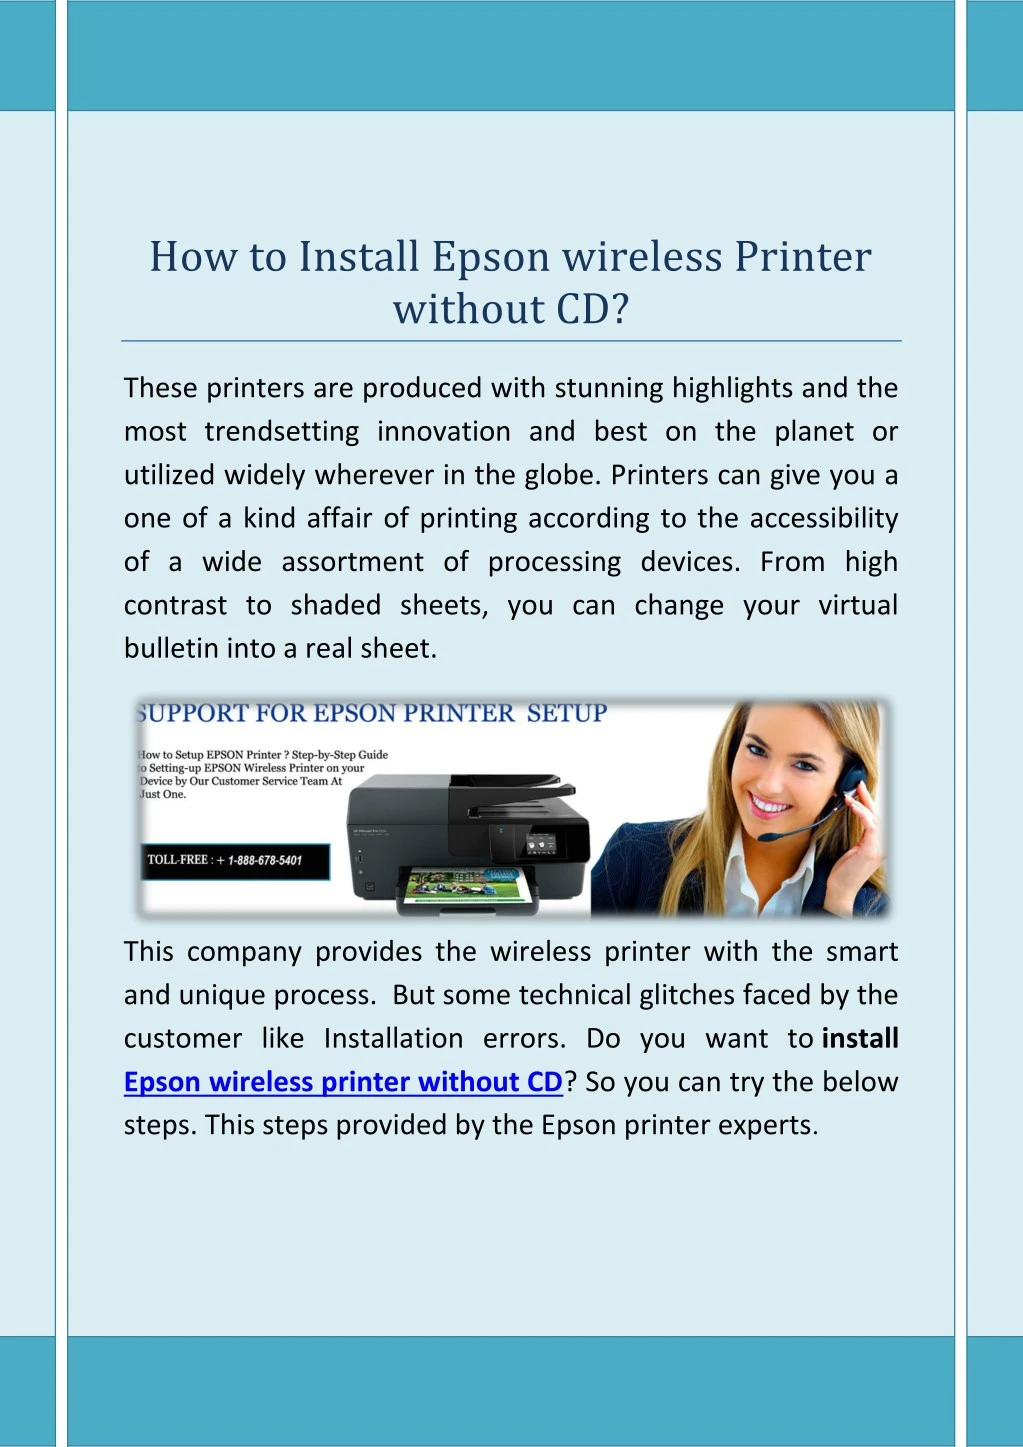 how to install epson wireless printer without cd